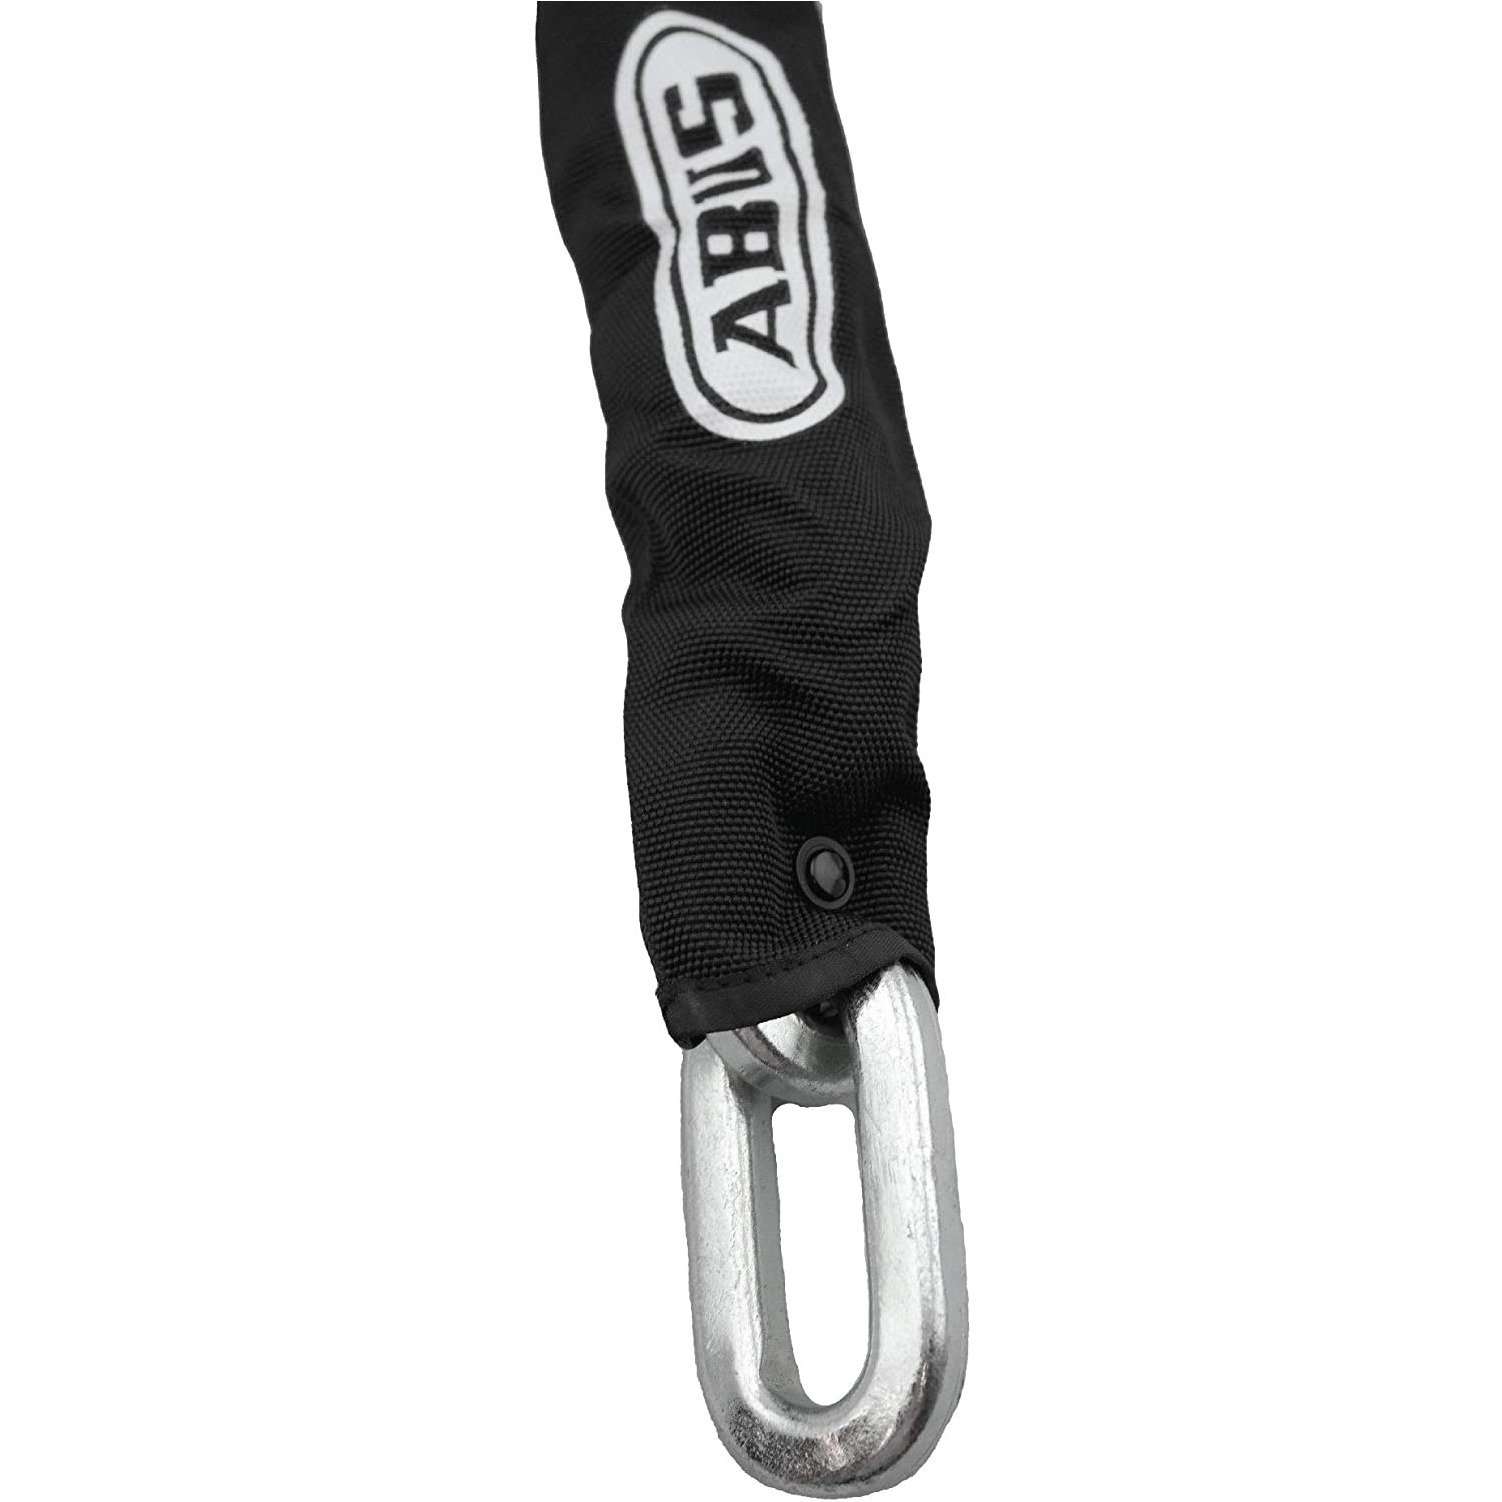 ABUS 8KS 10' Maximum Security Square Chain and Sleeve 5/16